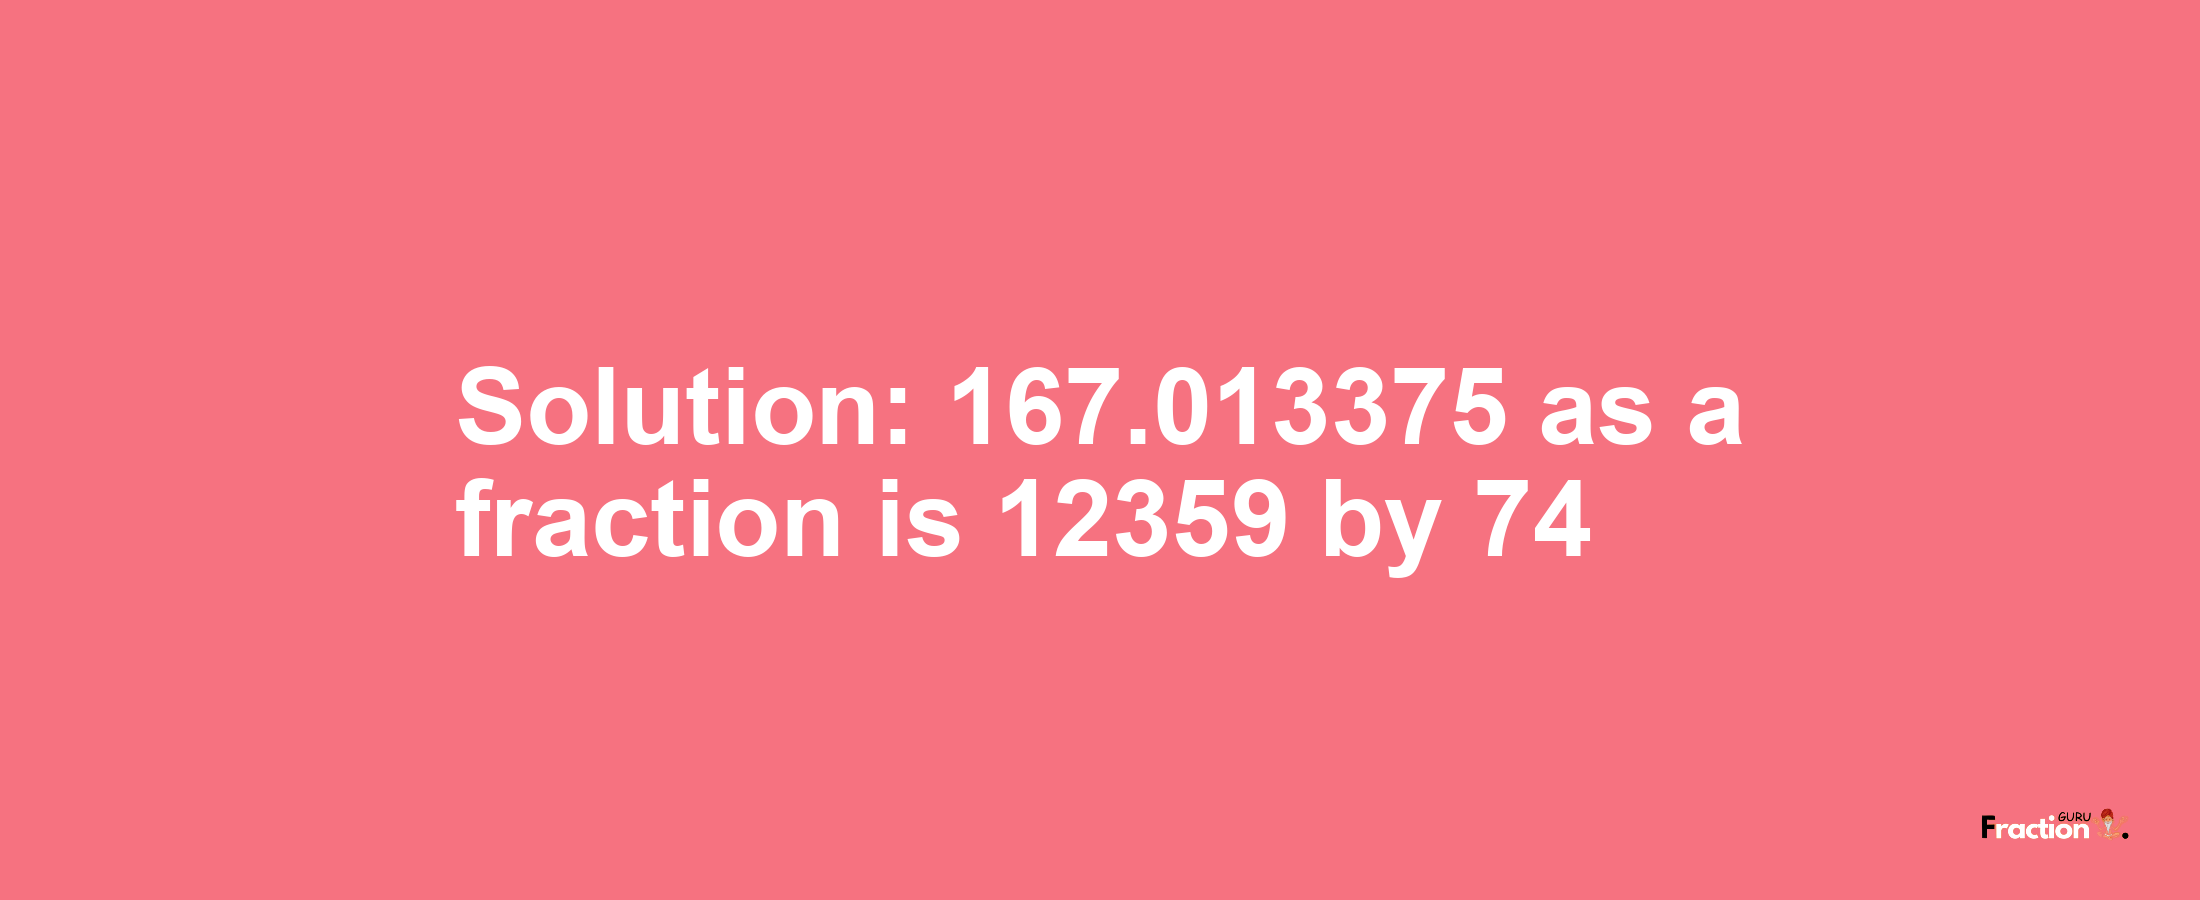 Solution:167.013375 as a fraction is 12359/74